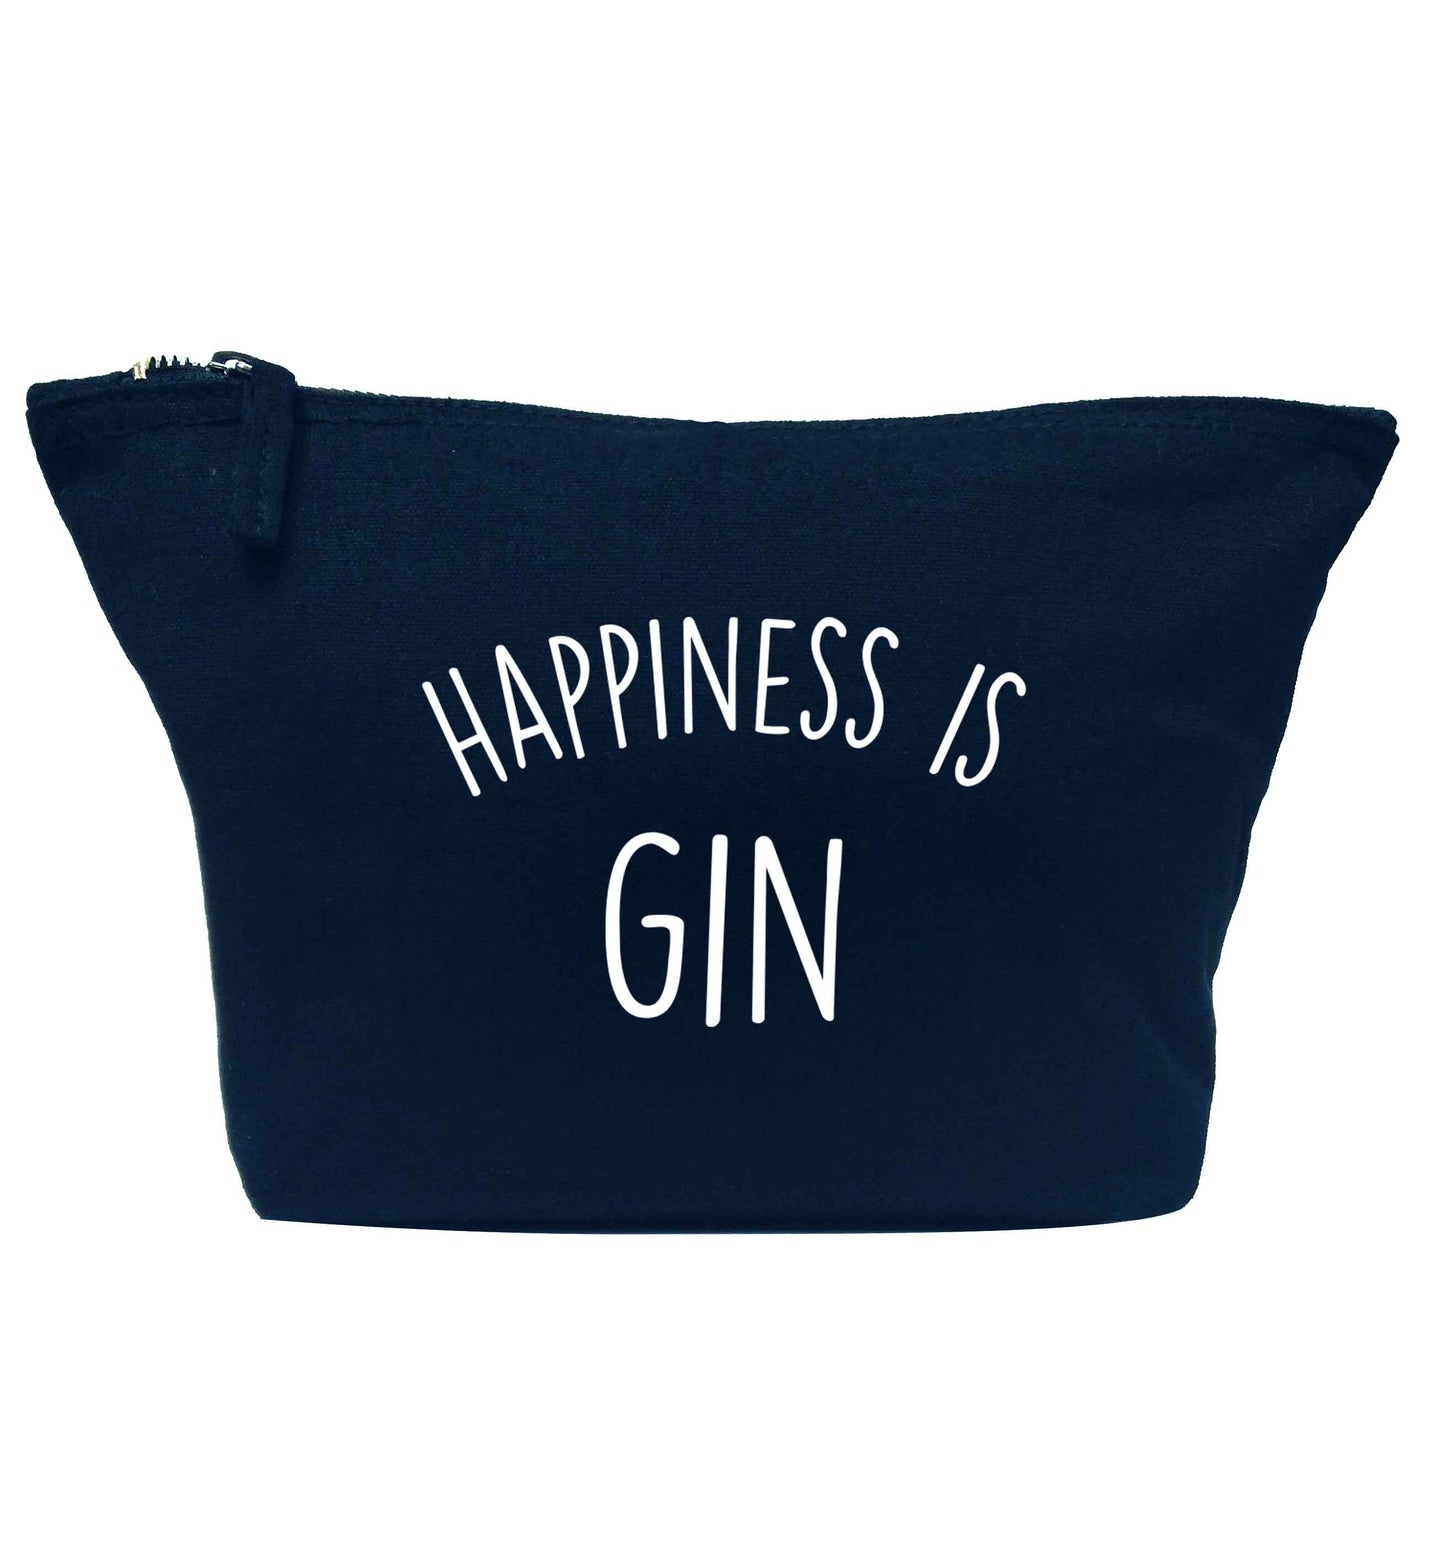 Happiness is gin navy makeup bag